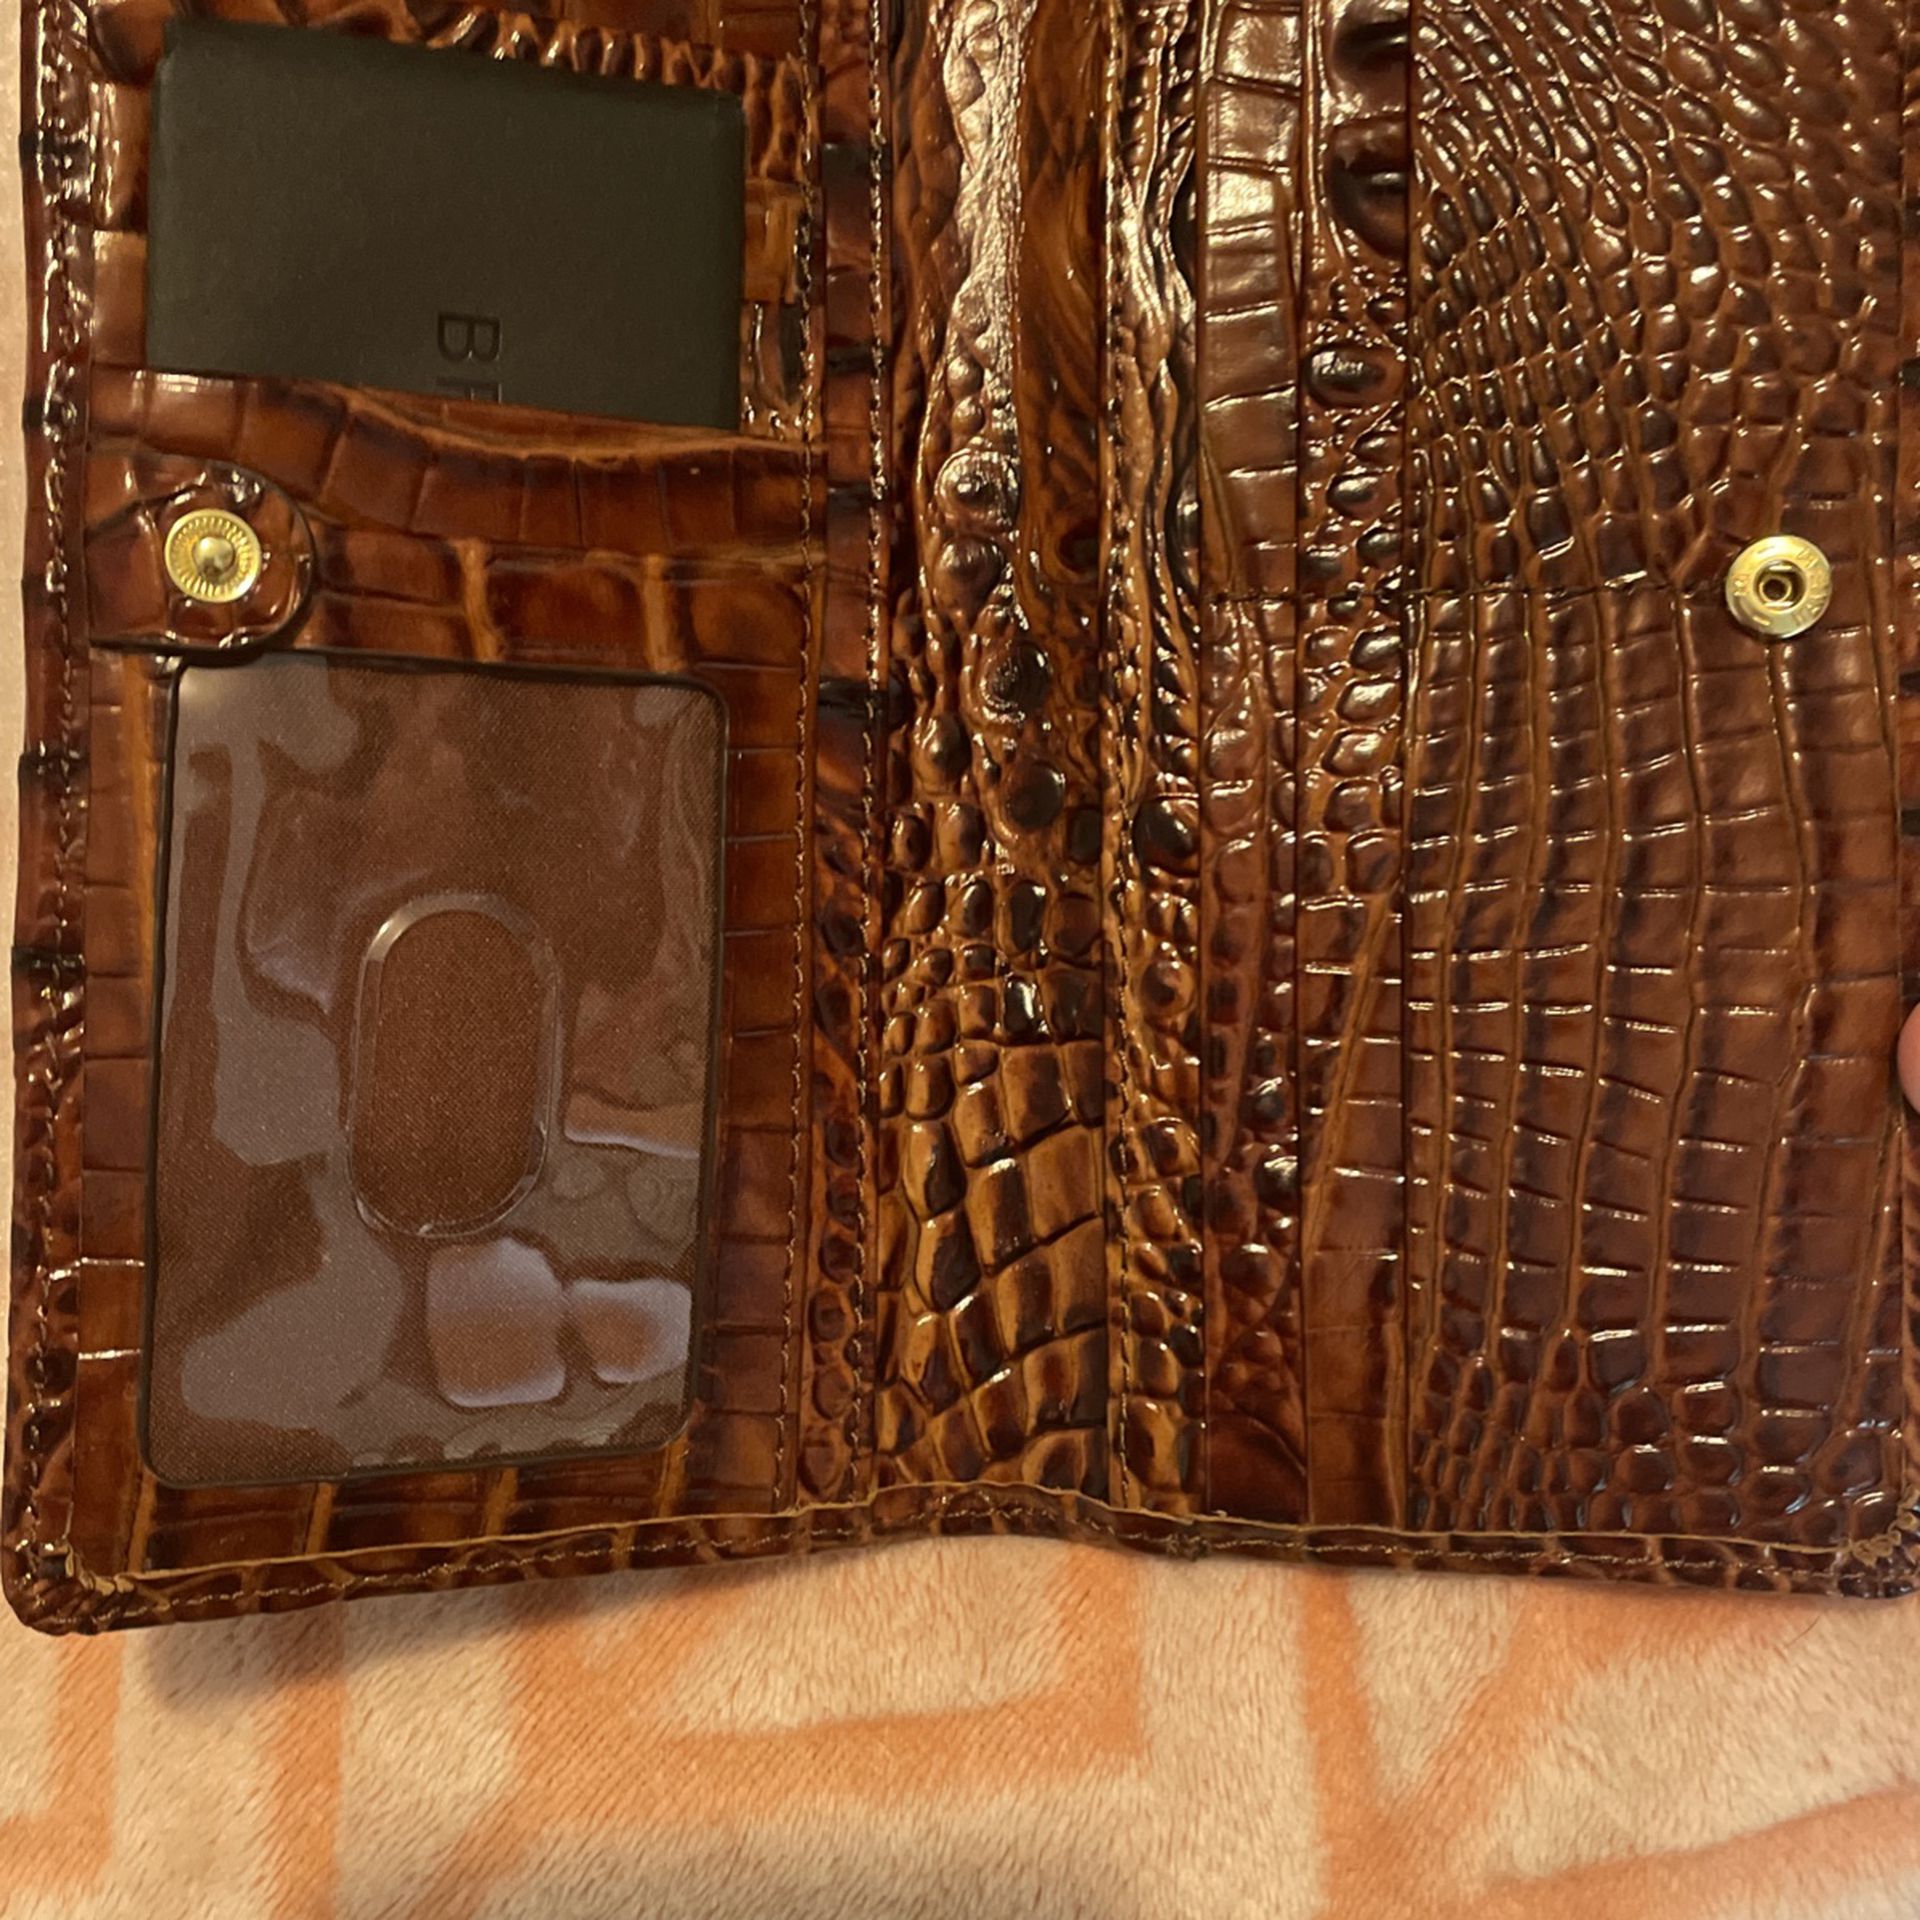 NEW- Brahmin Tabitha Emerald Lulia Purse And Matching Wallet for Sale in  Laguna Niguel, CA - OfferUp